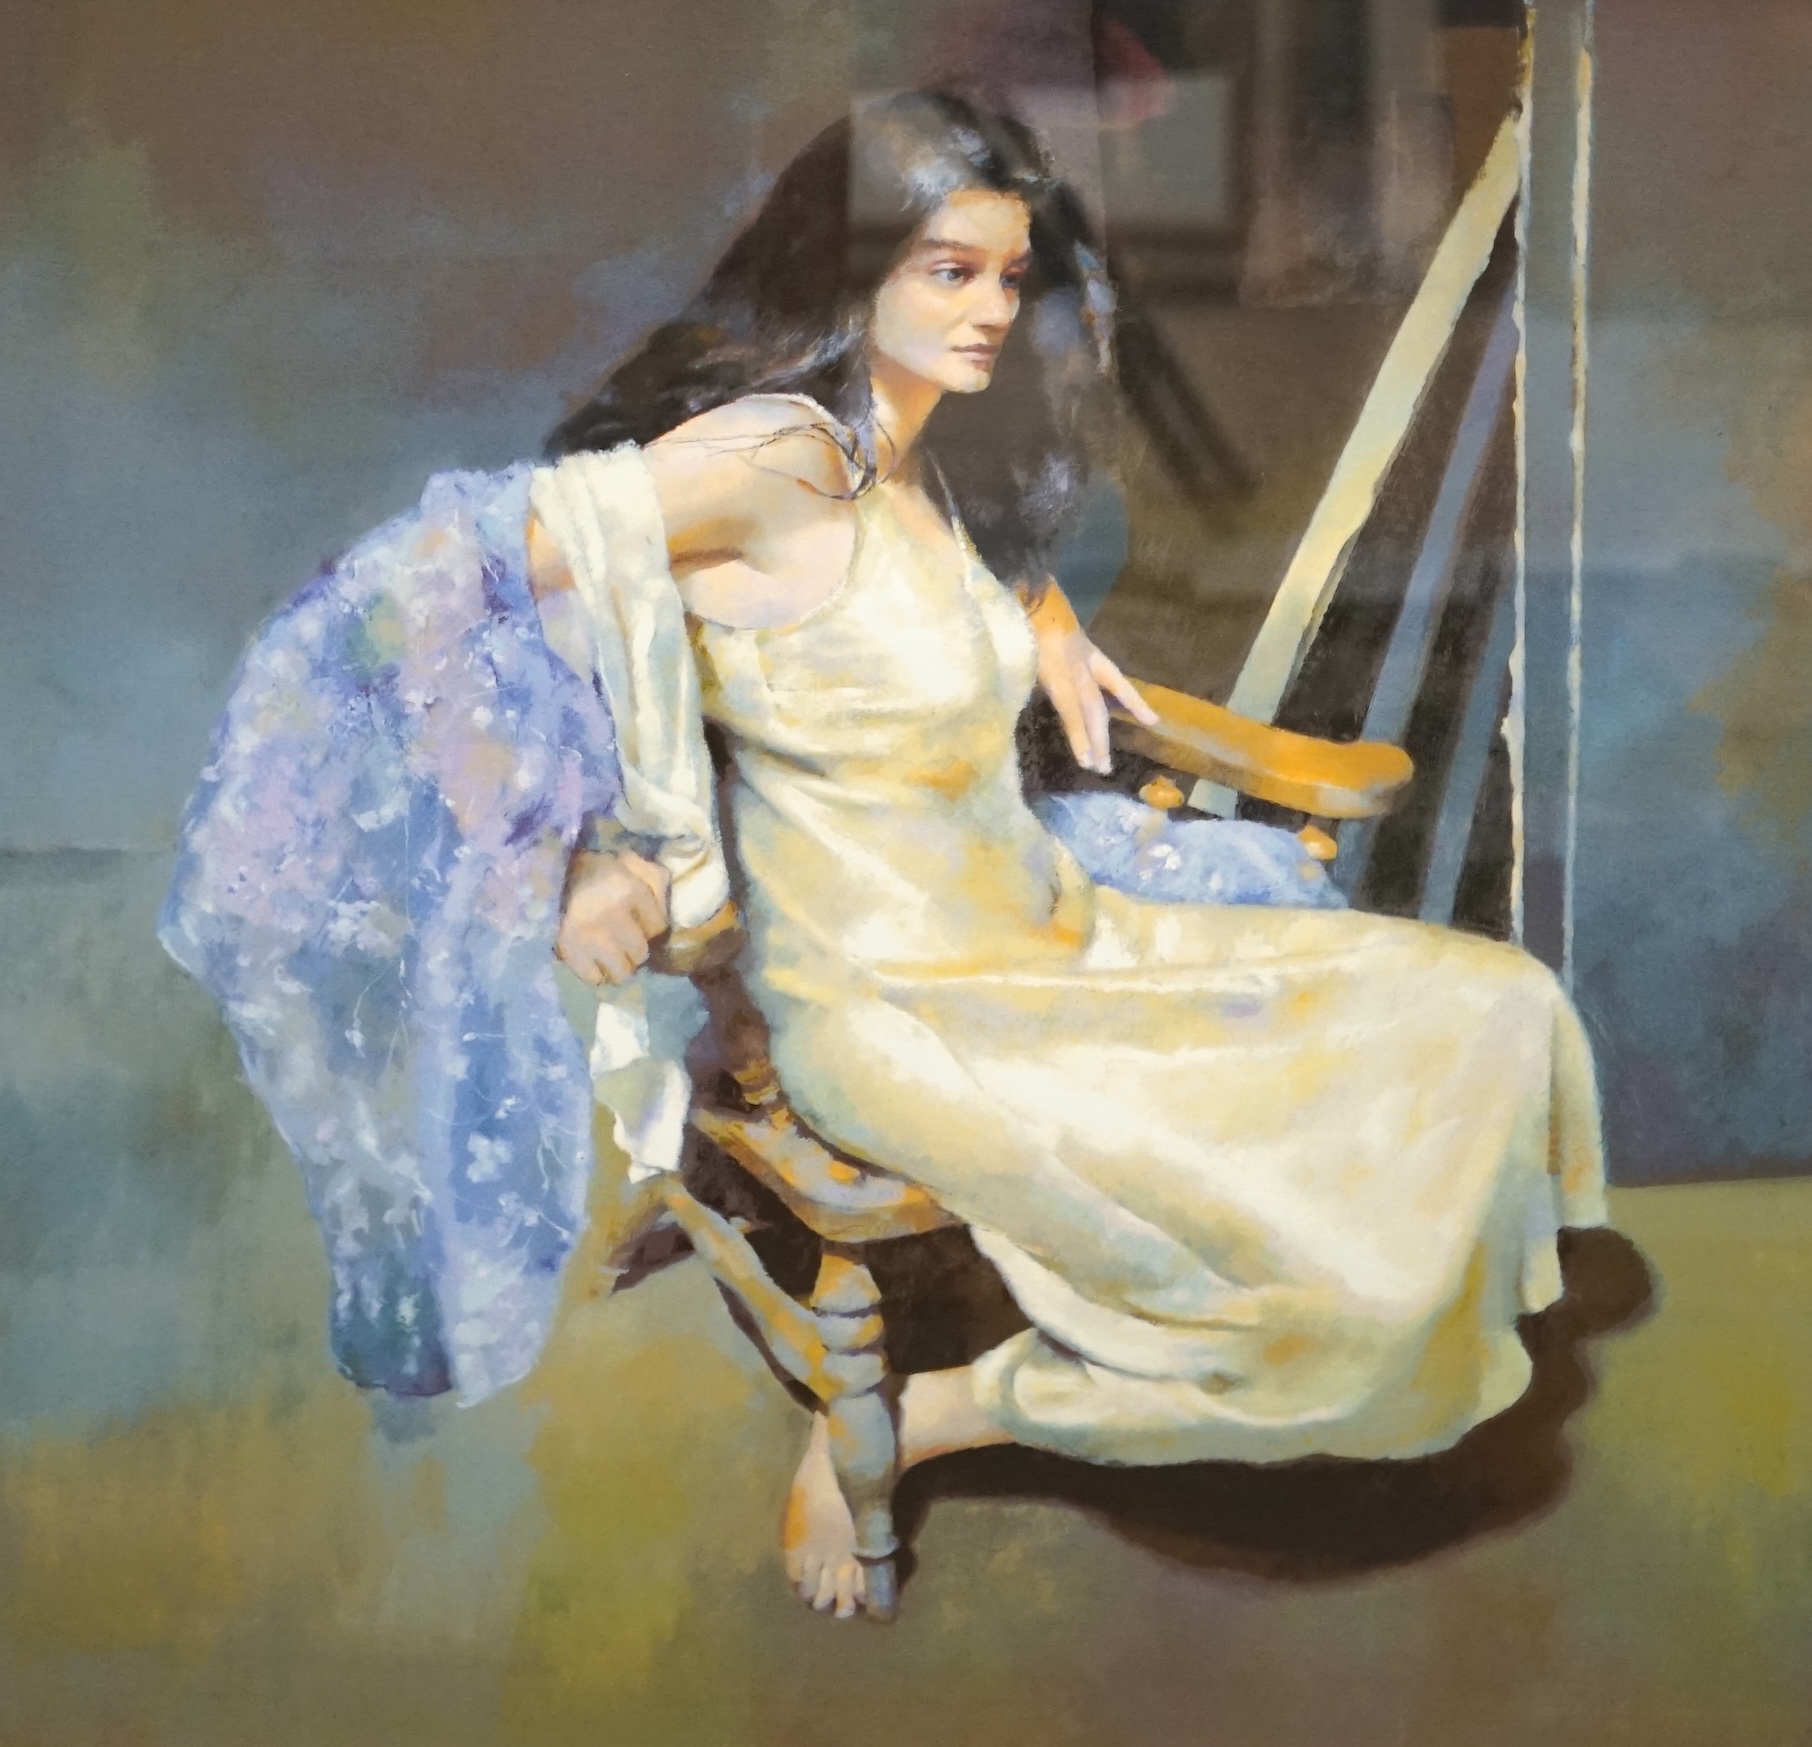 Robert Lenkiewicz (1941-2002), silkscreen, 'Ester seated by R.O. Lenkiewicz', signed in pencil and titled along with the name of the artist Ester Dallaunay, 11/475, 60 x 60cm. Condition - good, has slipped slightly in th